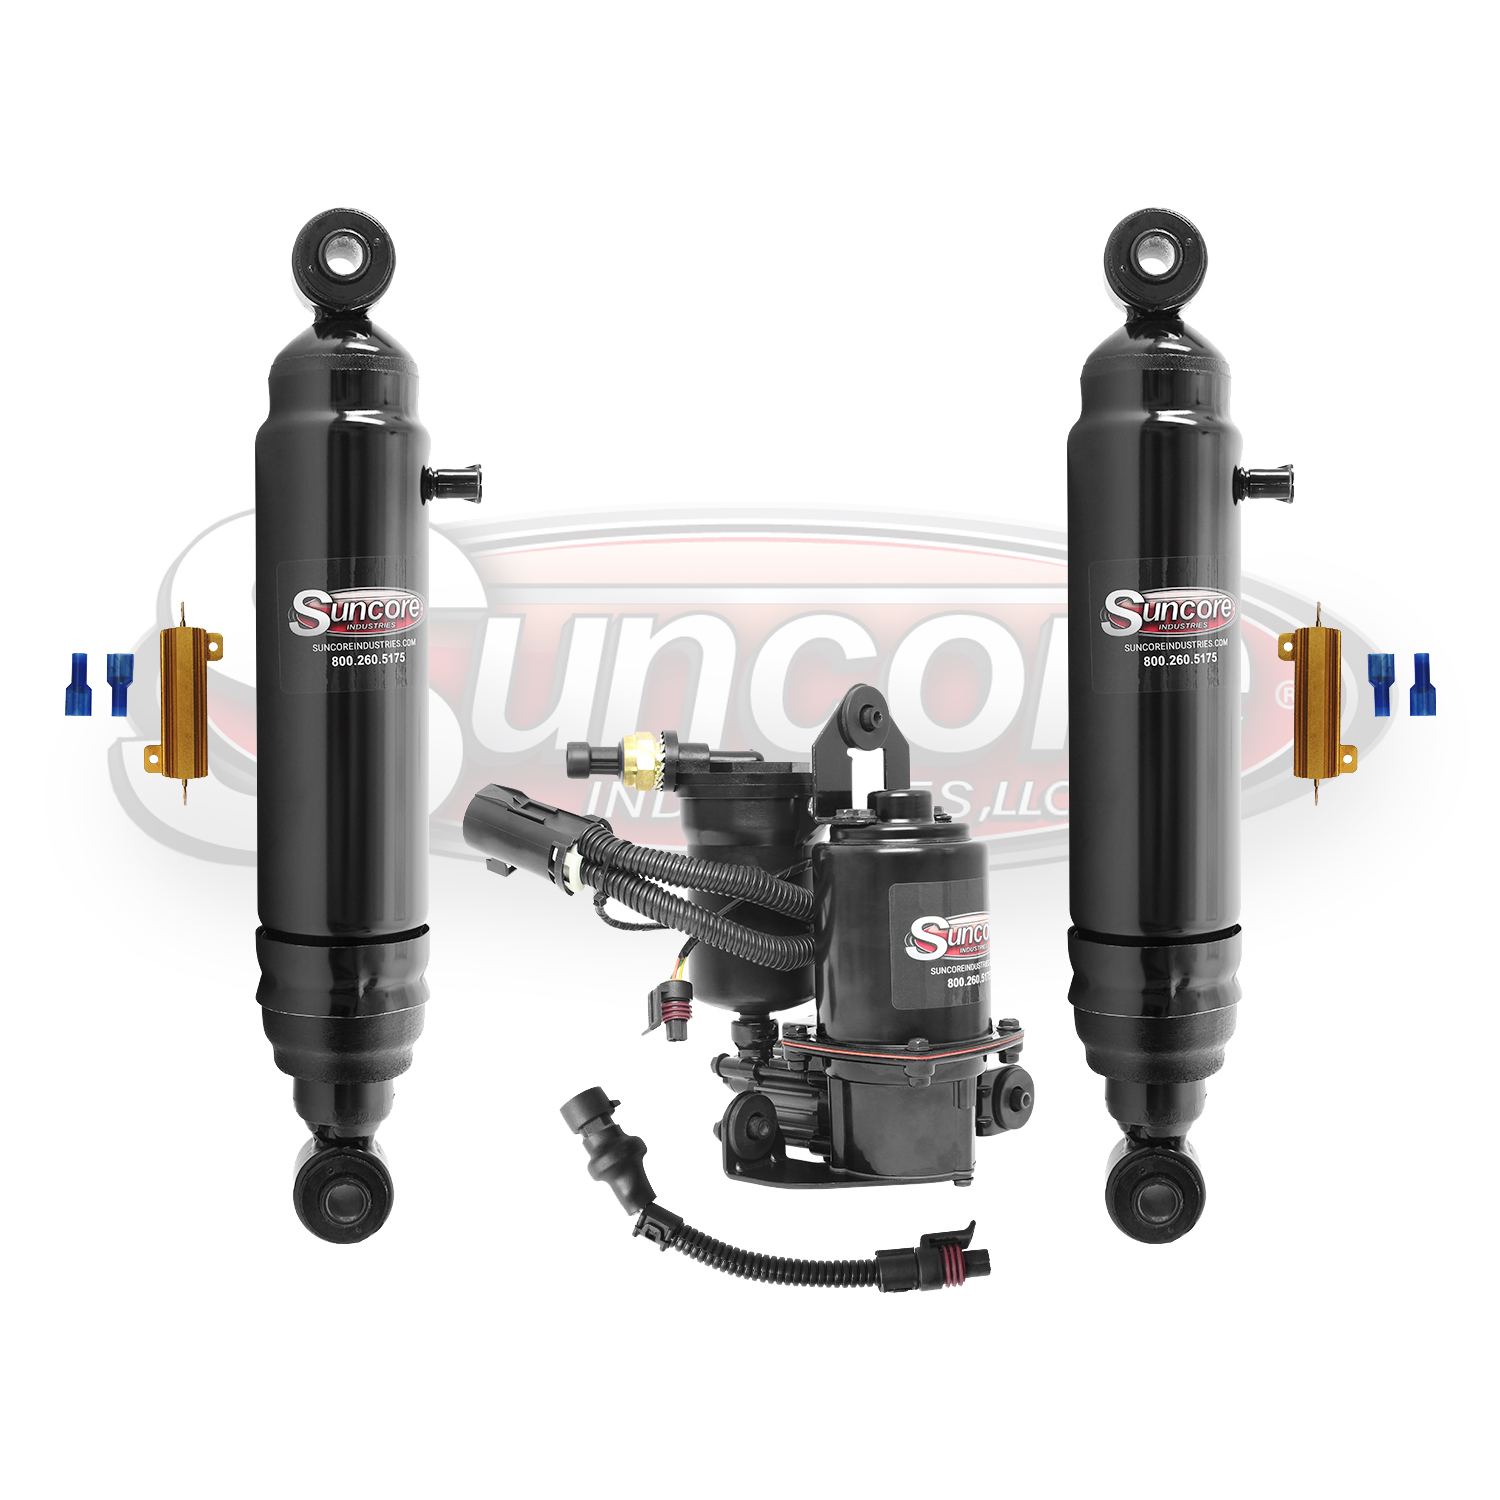 Rear Active Electronic to Passive Air Shocks Conversion Kit w/ Air Compressor & Resistors for GMT800 & GMT900